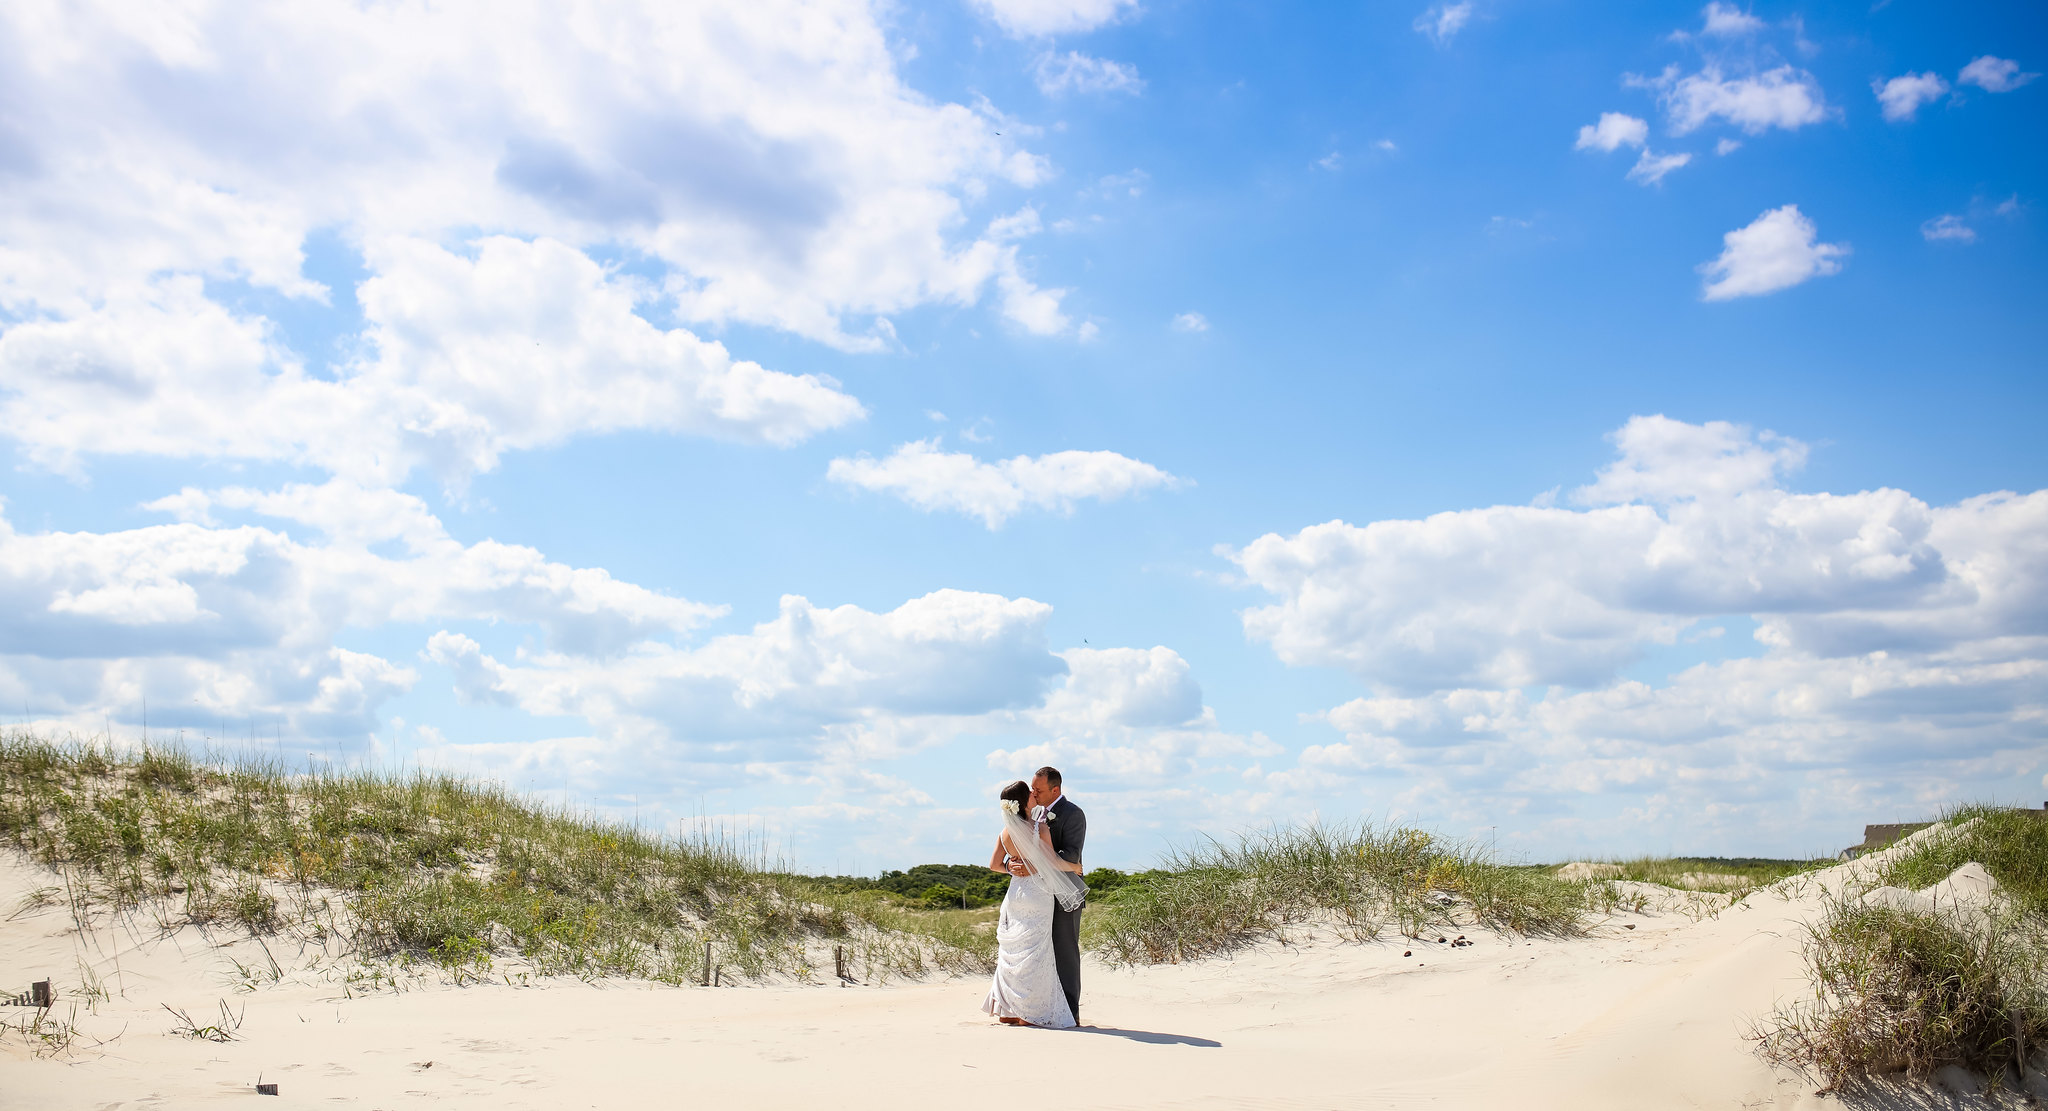 24th annual Outer Banks Wedding Weekend and Expo this Friday through Sunday